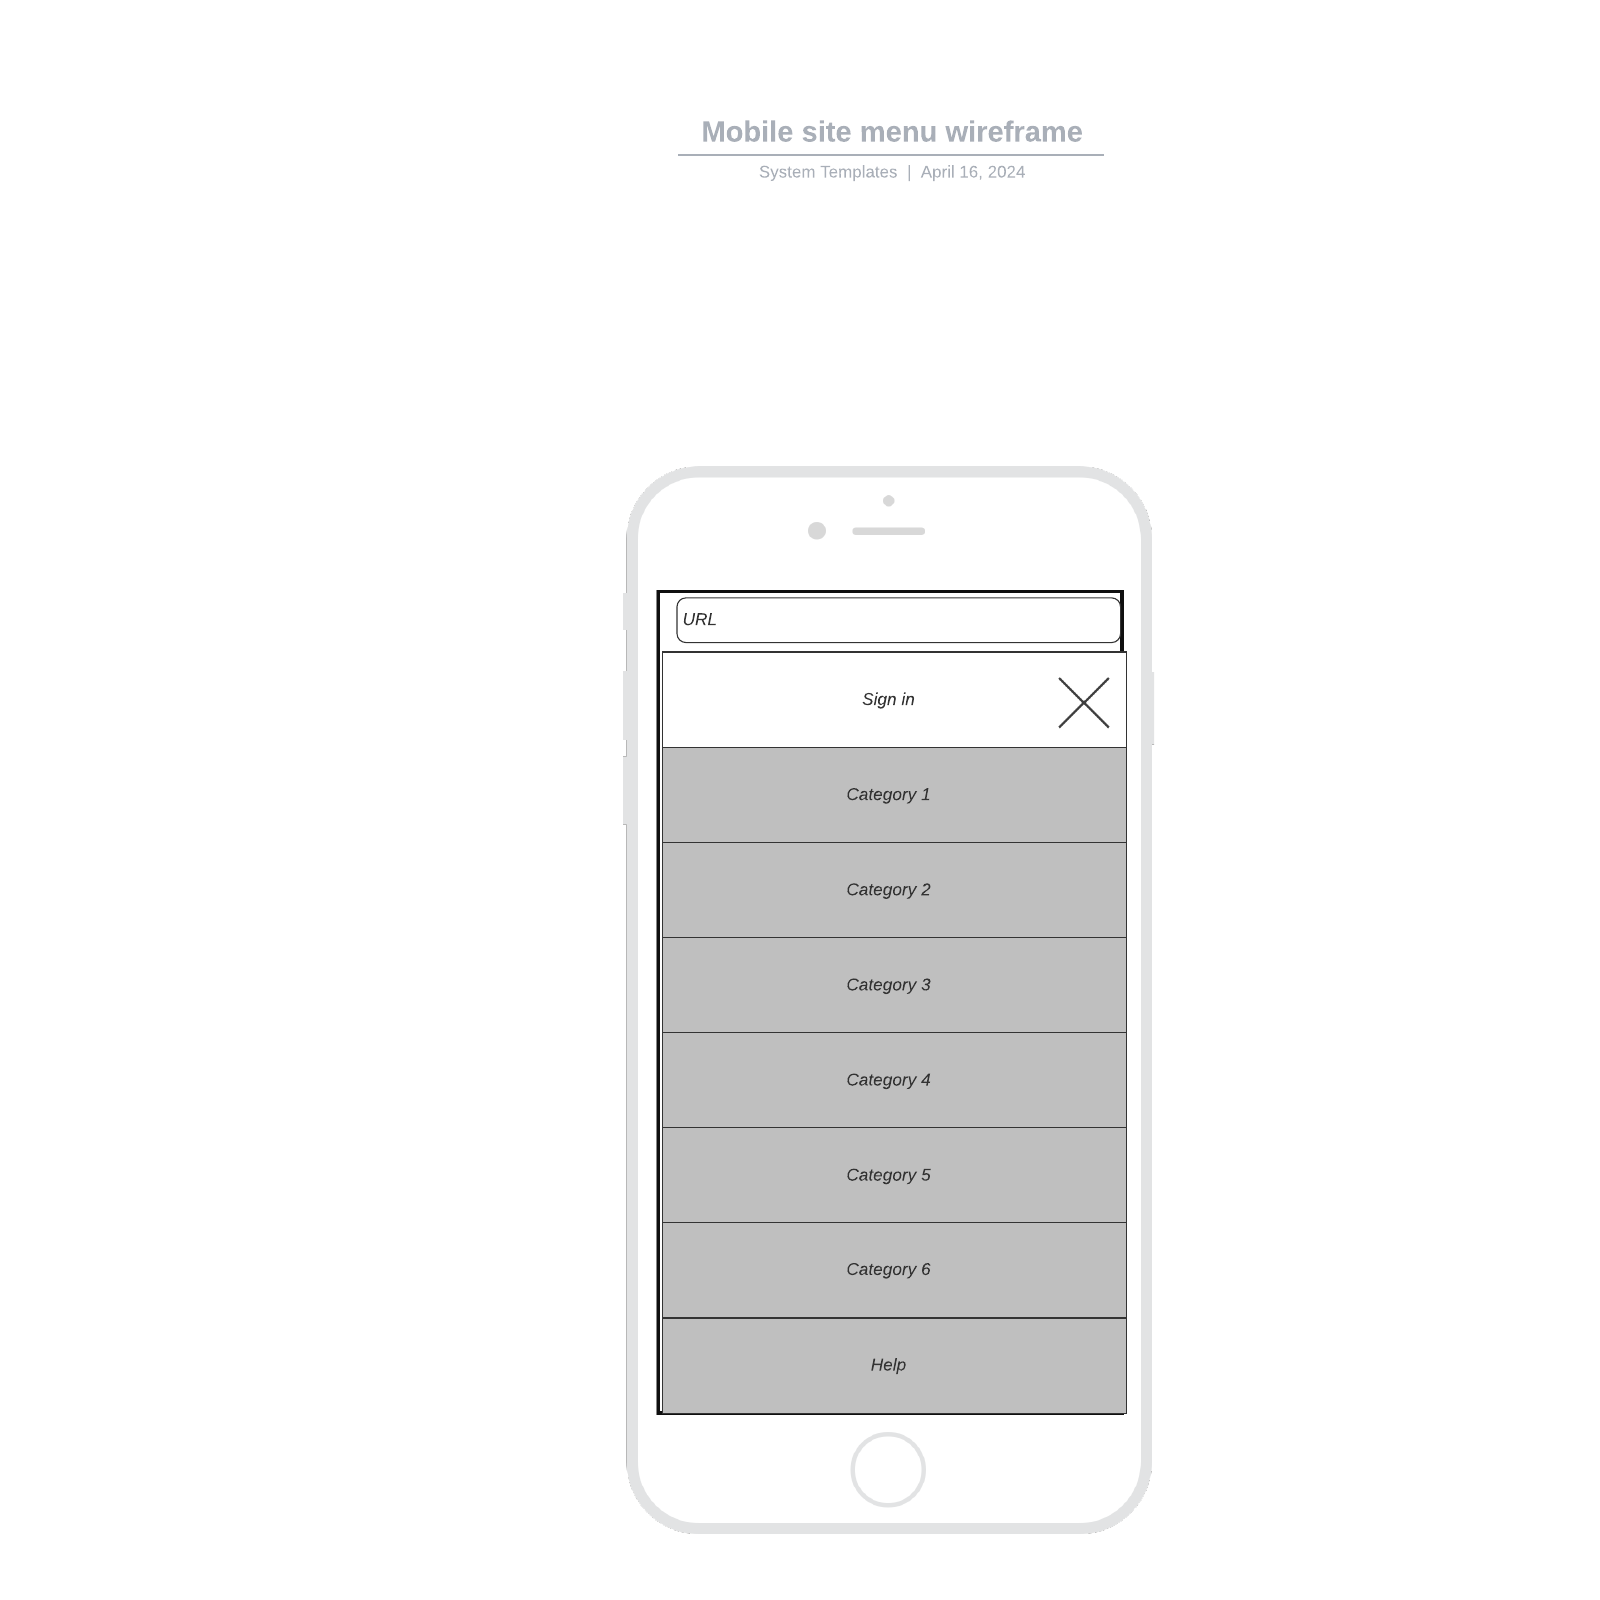 Mobile site menu wireframe example